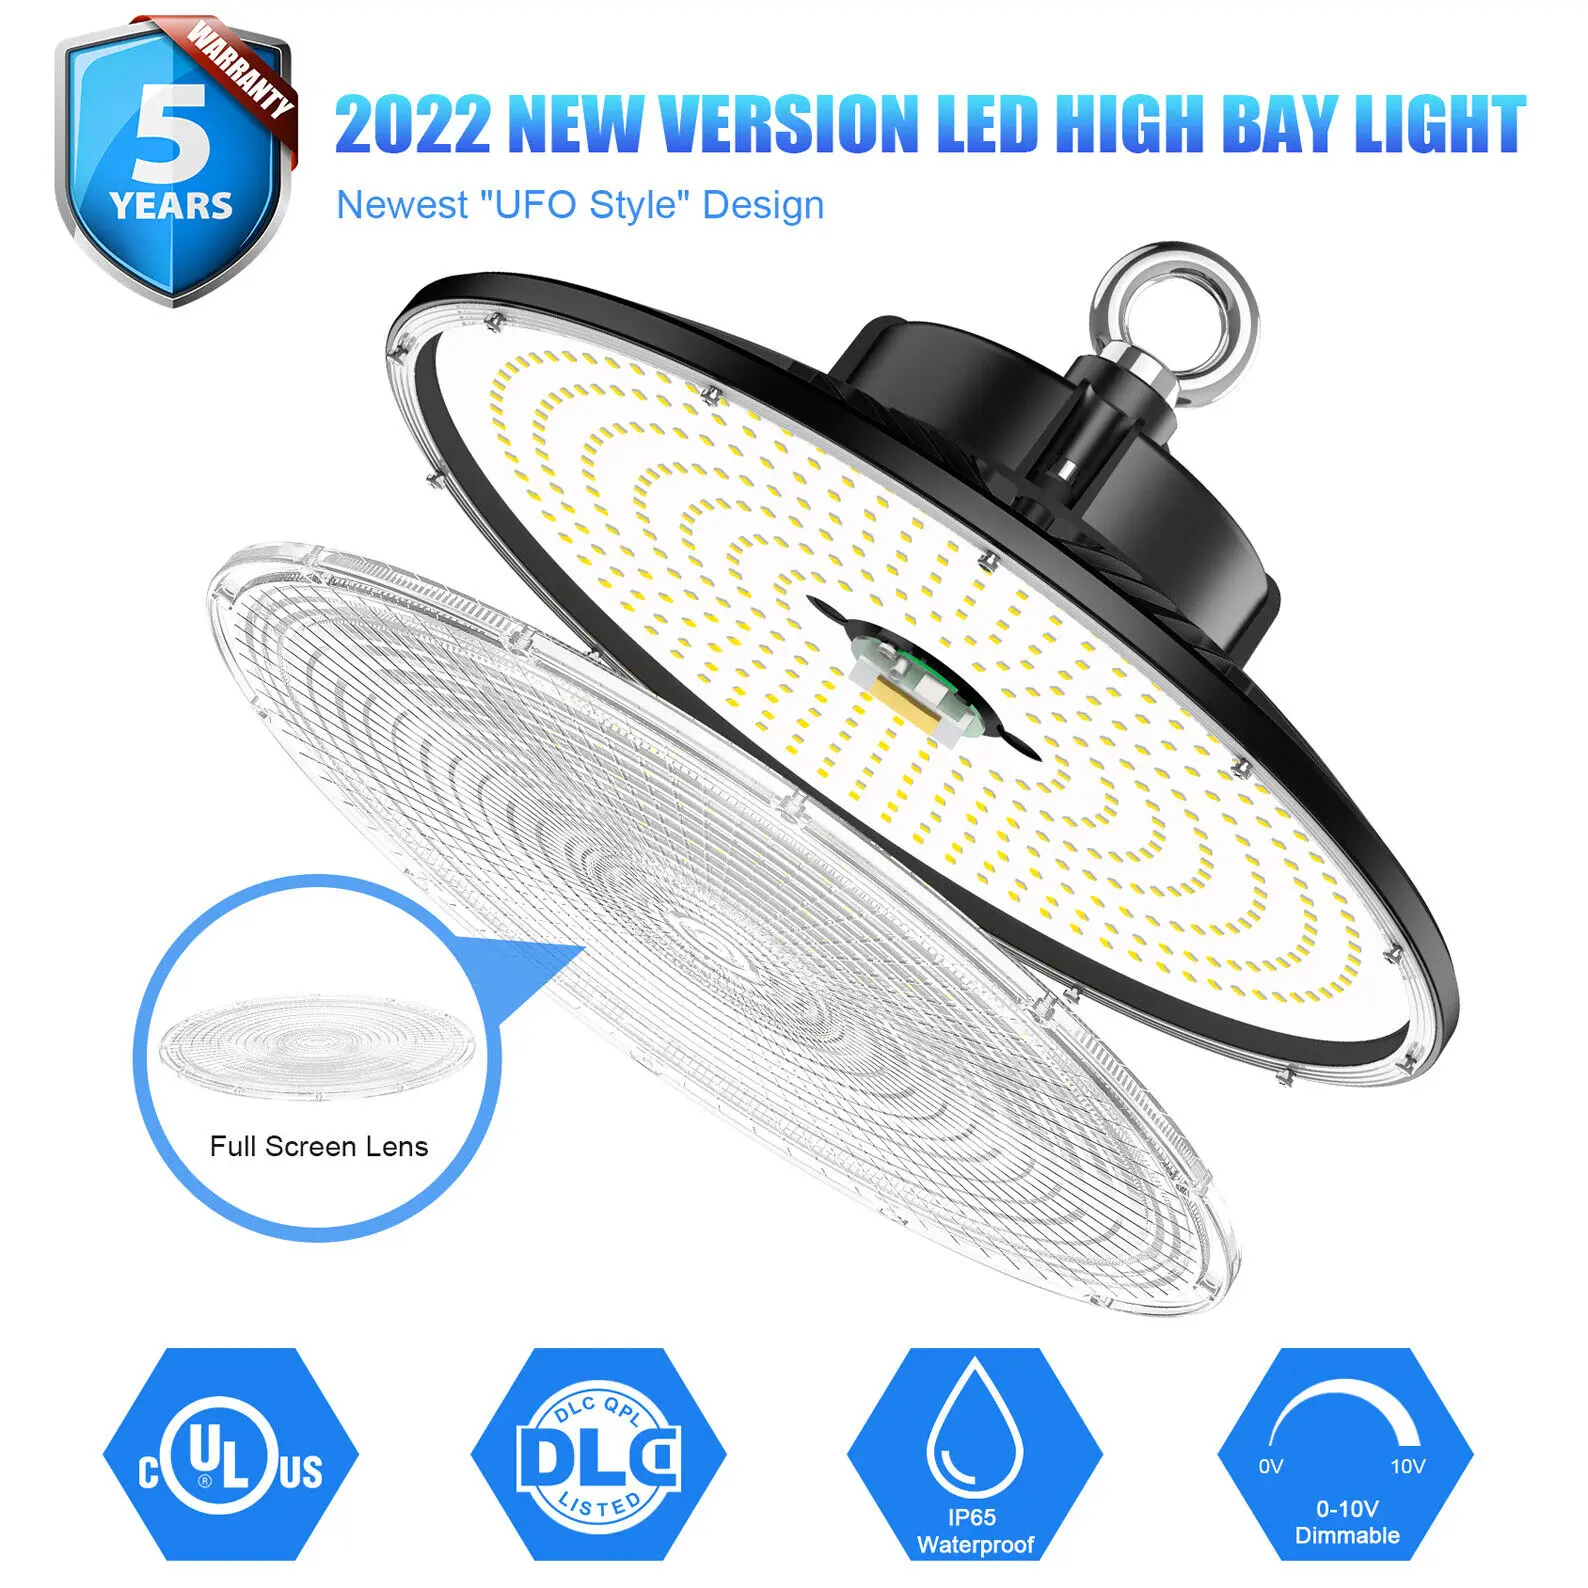 

UFO LED High Bay Light,100W 150W 200W 240W Warehouse Lighting UL/DLC Listed,0-10V Dimmable,6ft Cable,5000K, IP65 Waterproof